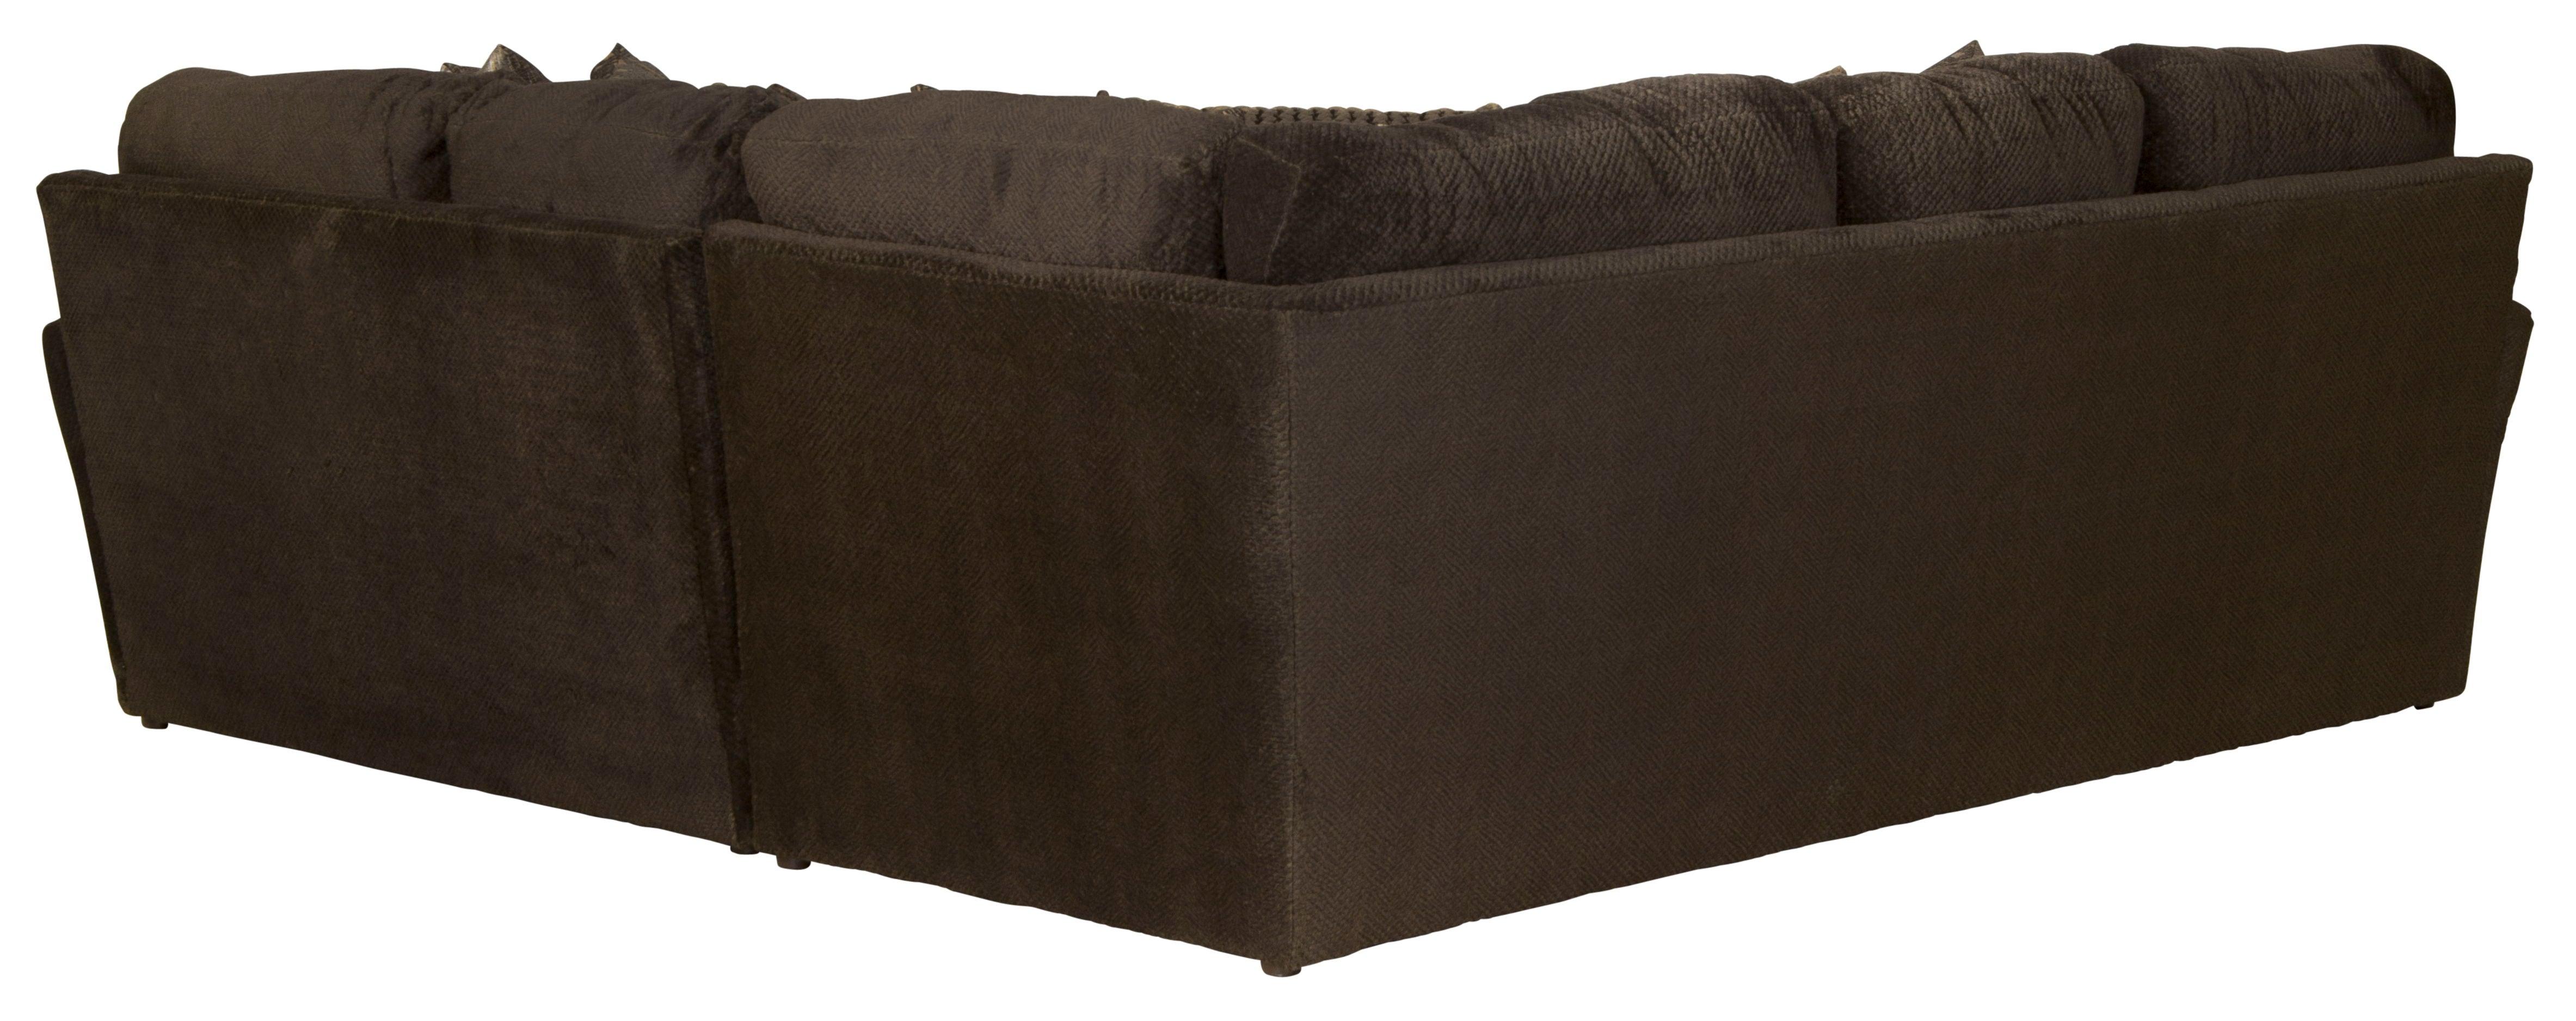 Jackson - Mammoth - Sectional - 5th Avenue Furniture